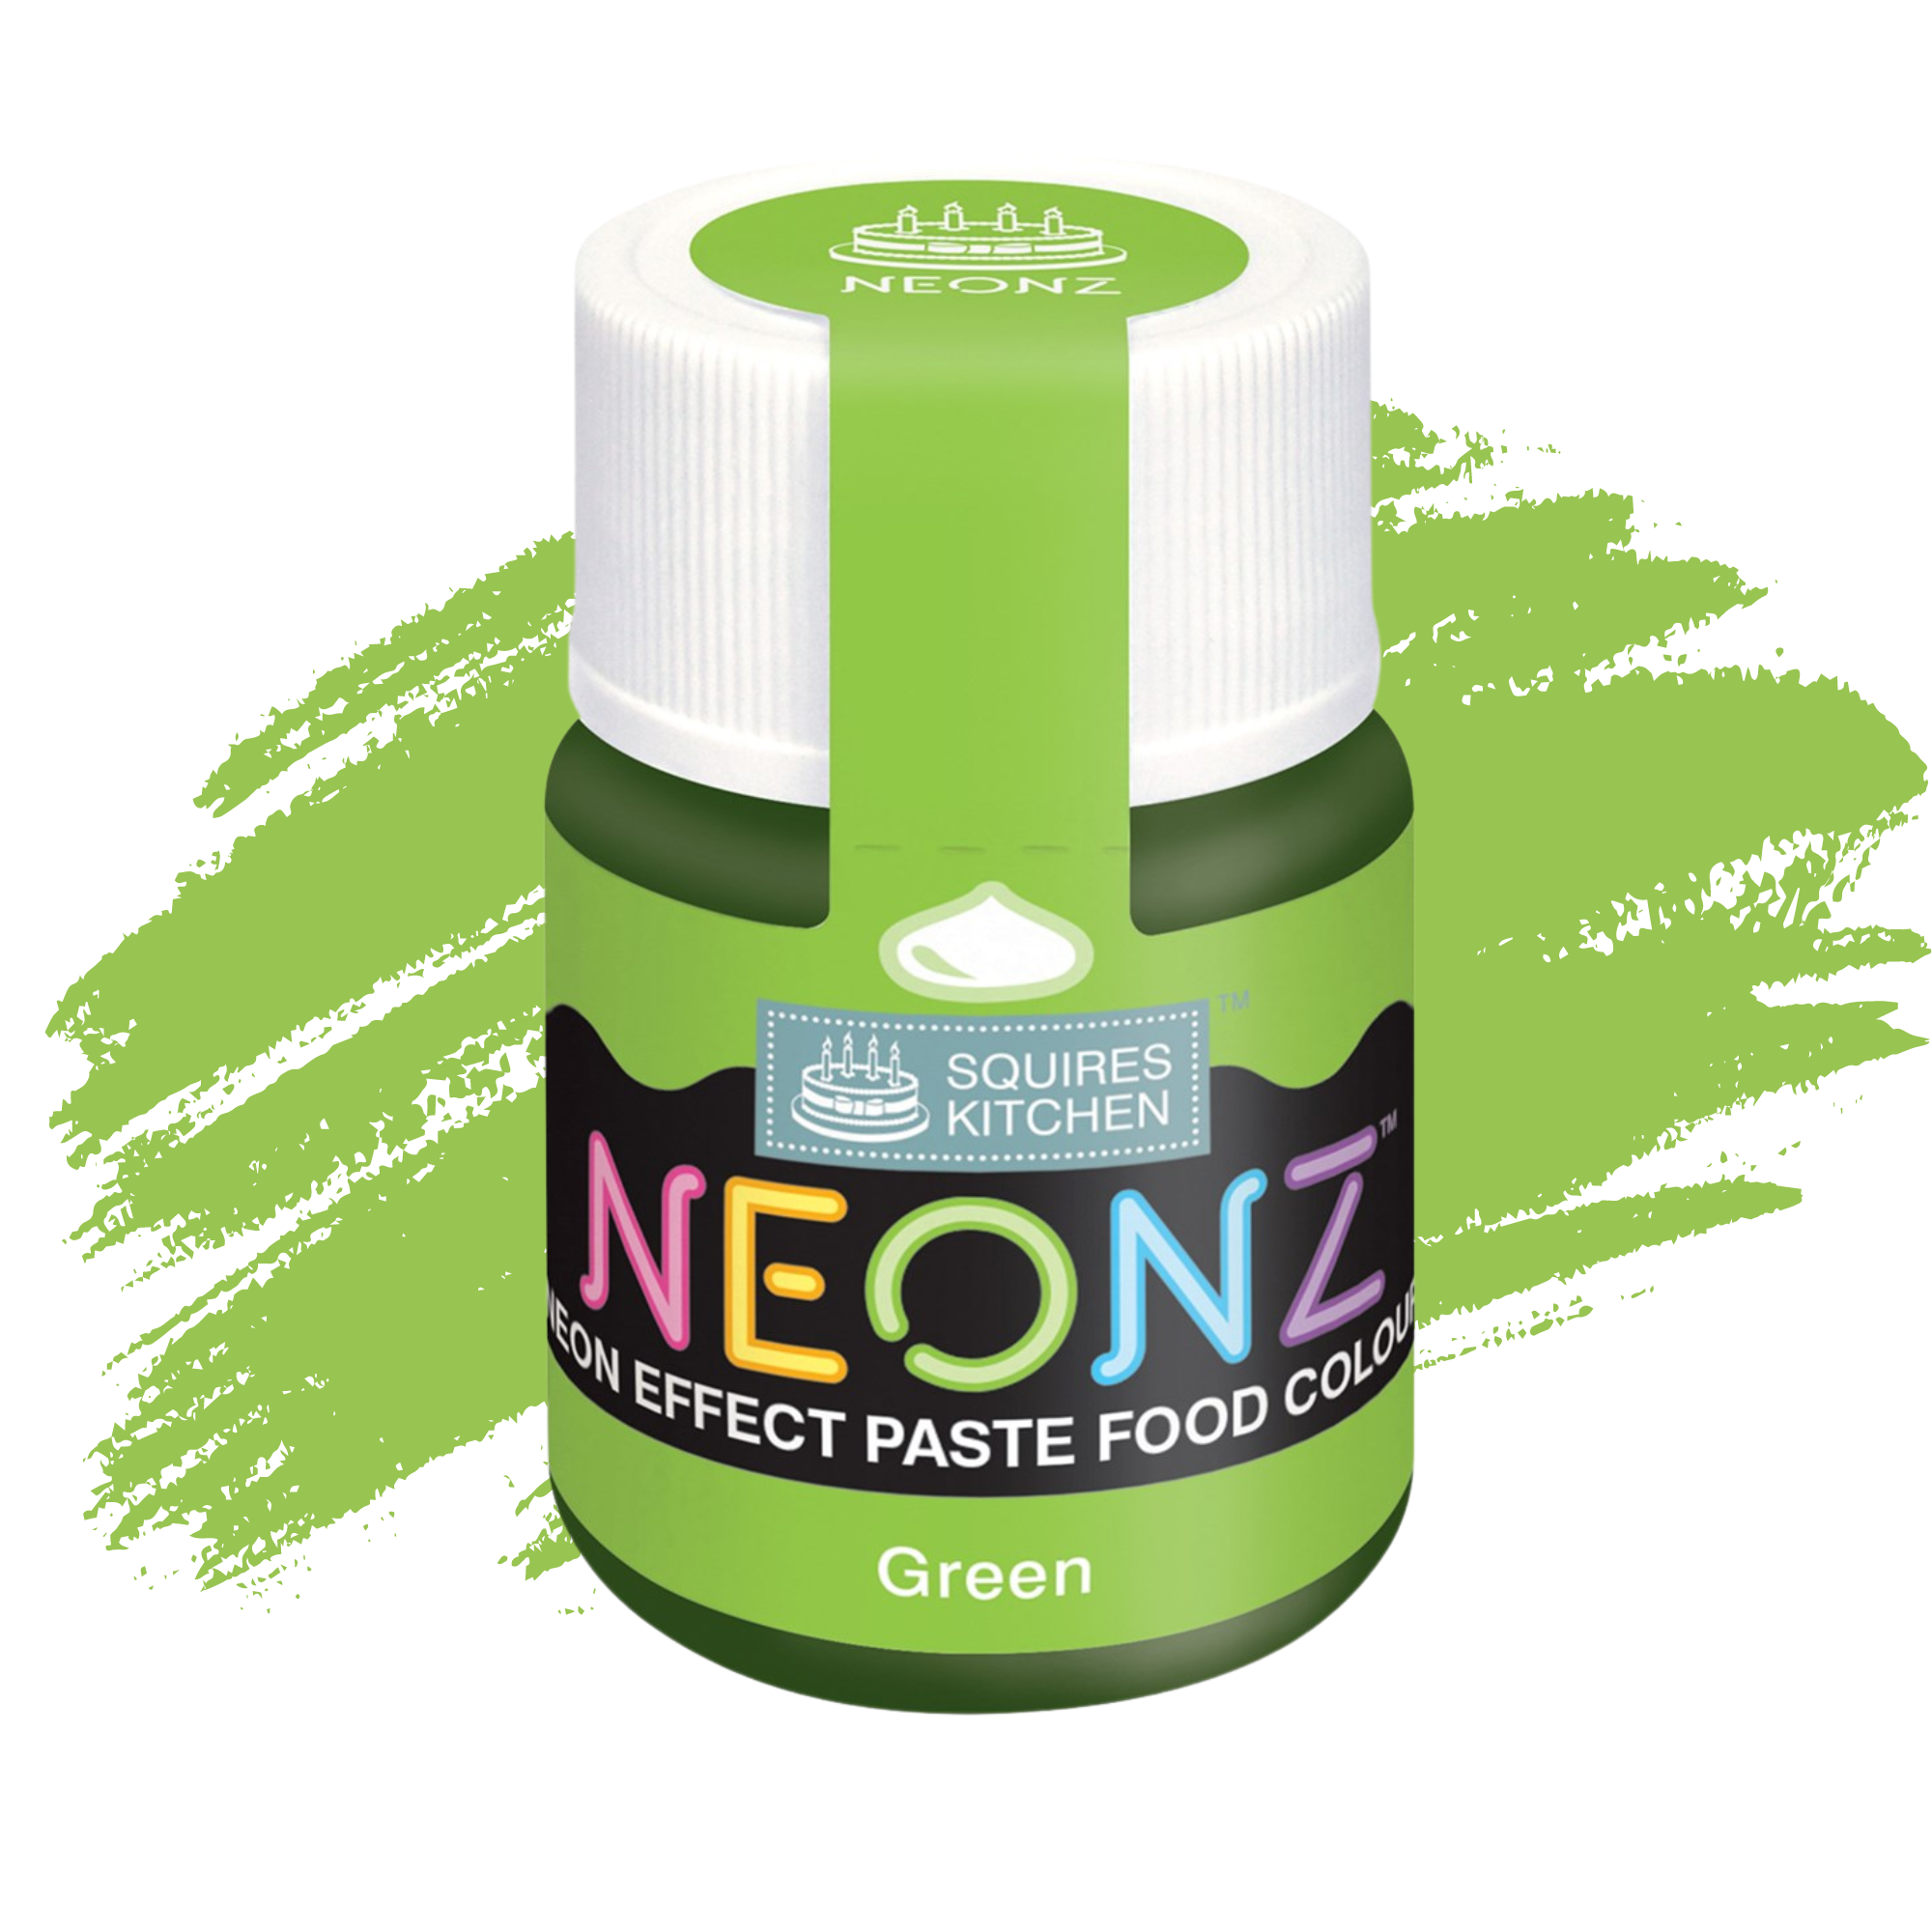 Squires Kitchen Neonz Neon Effect Concentrated Paste Food Colouring - 20g - Green 